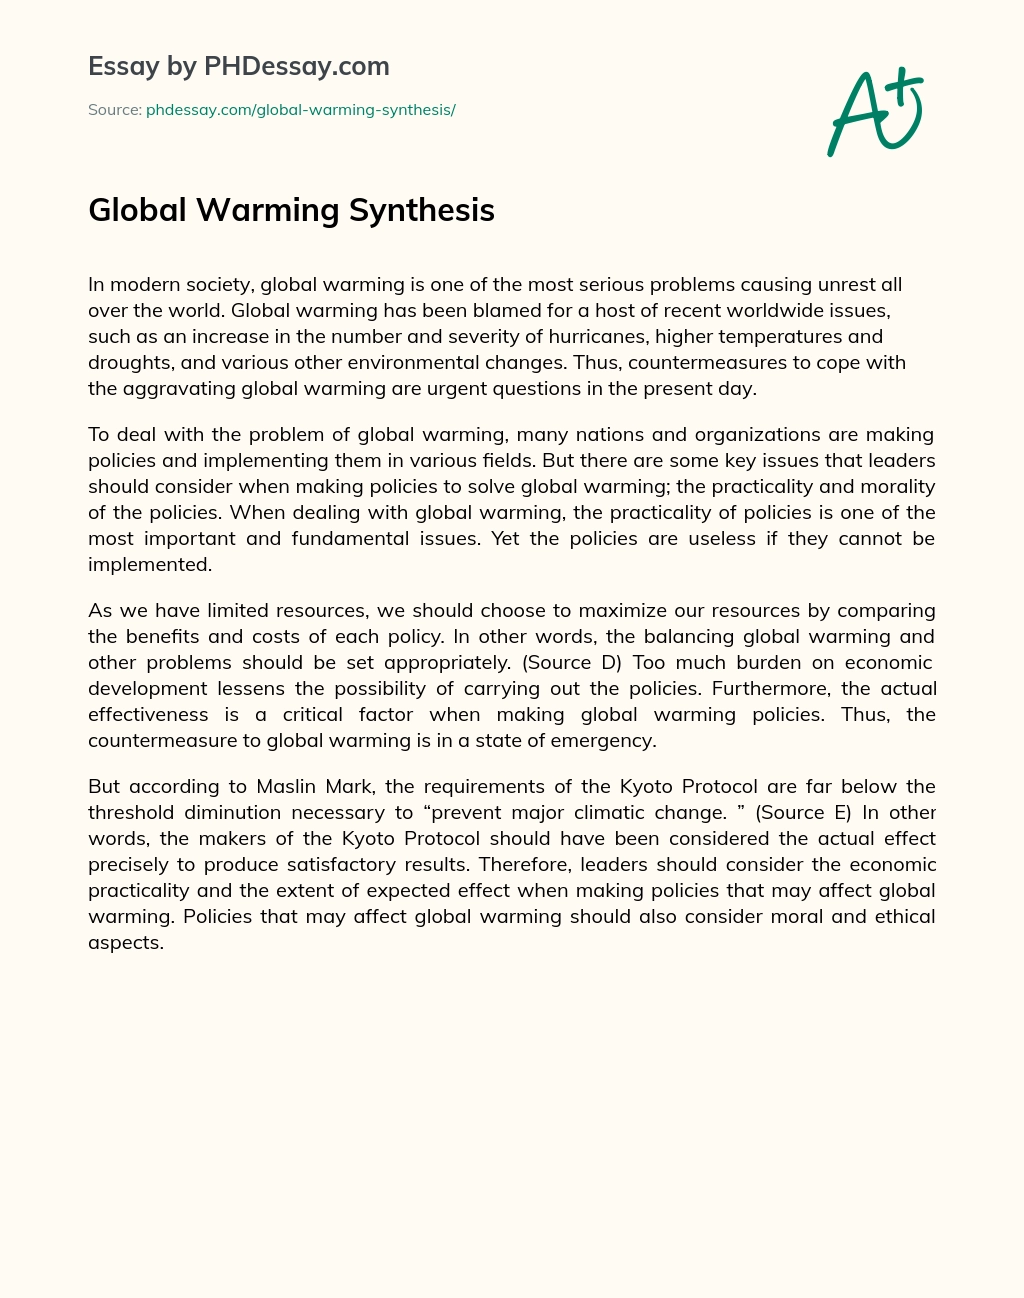 Global Warming Synthesis